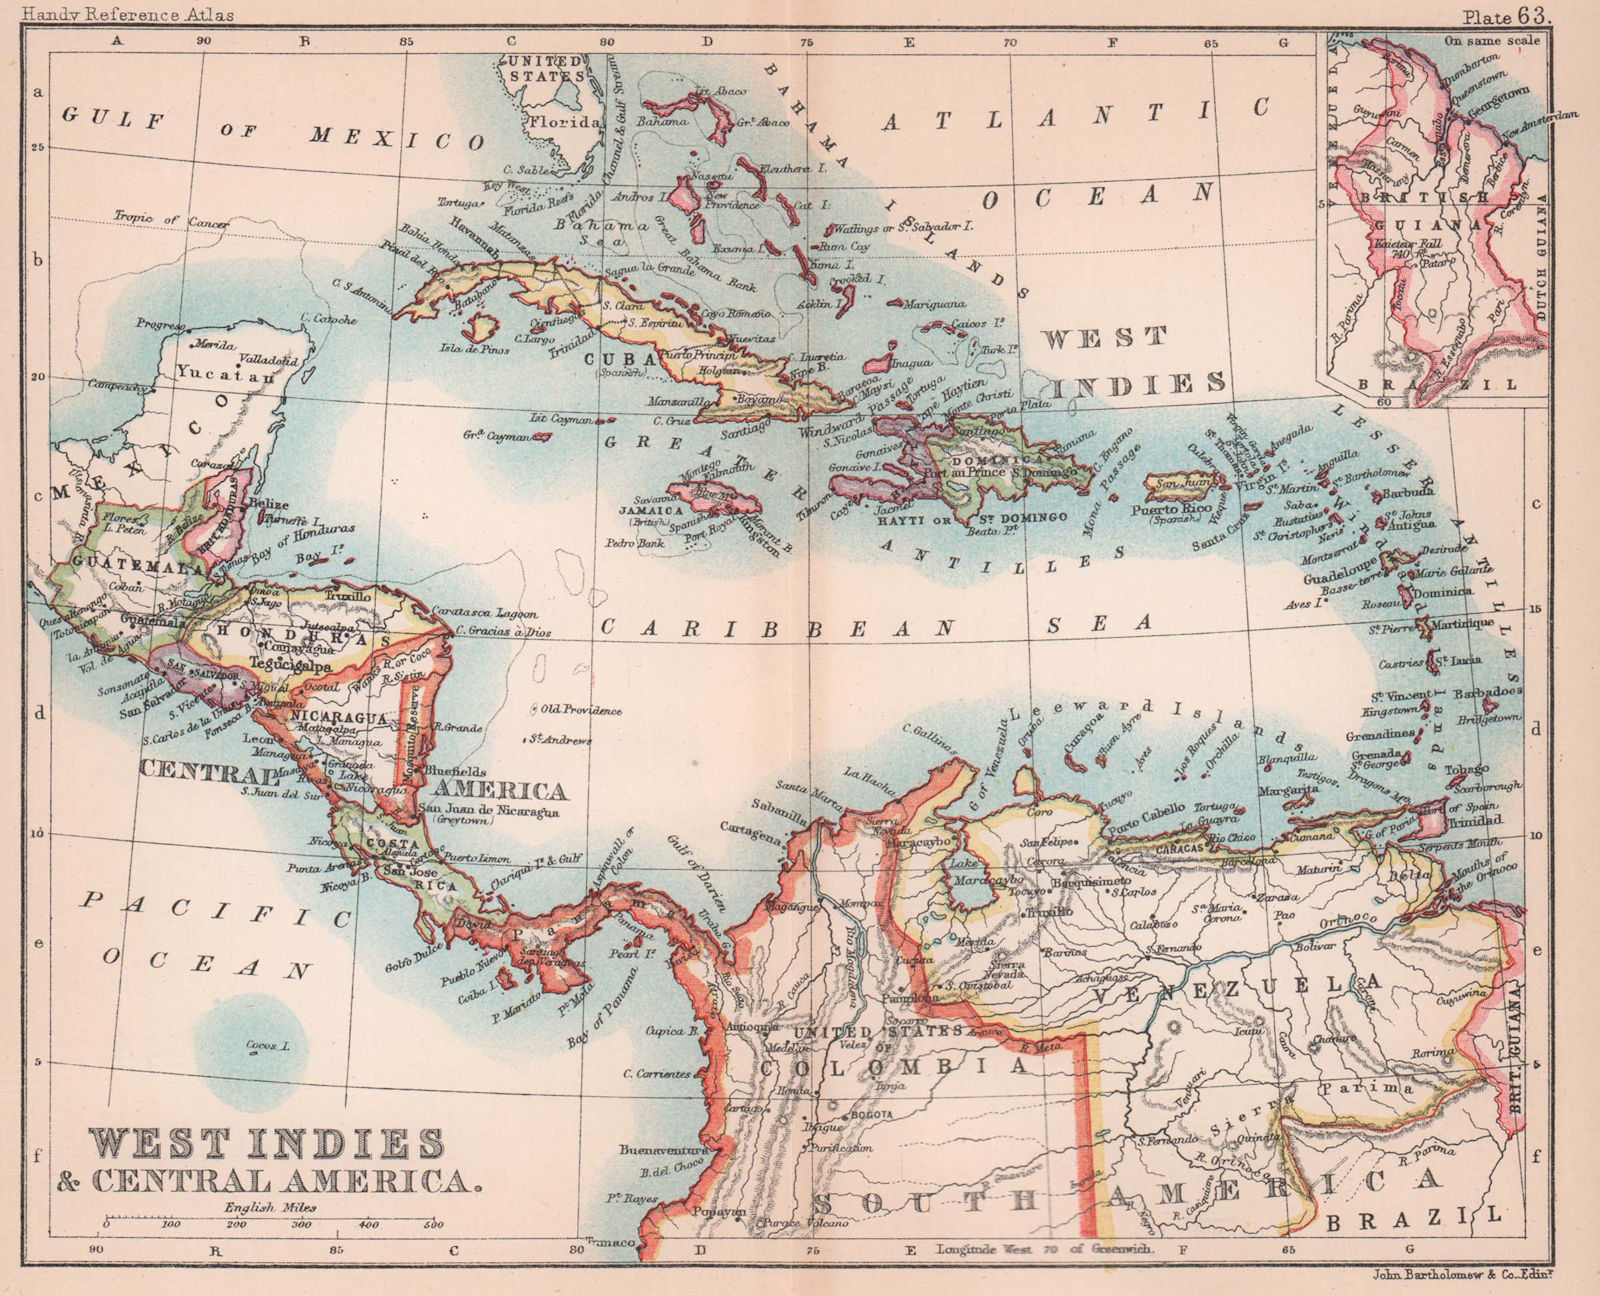 Associate Product West Indies & Central America. Caribbean. BARTHOLOMEW 1893 old antique map